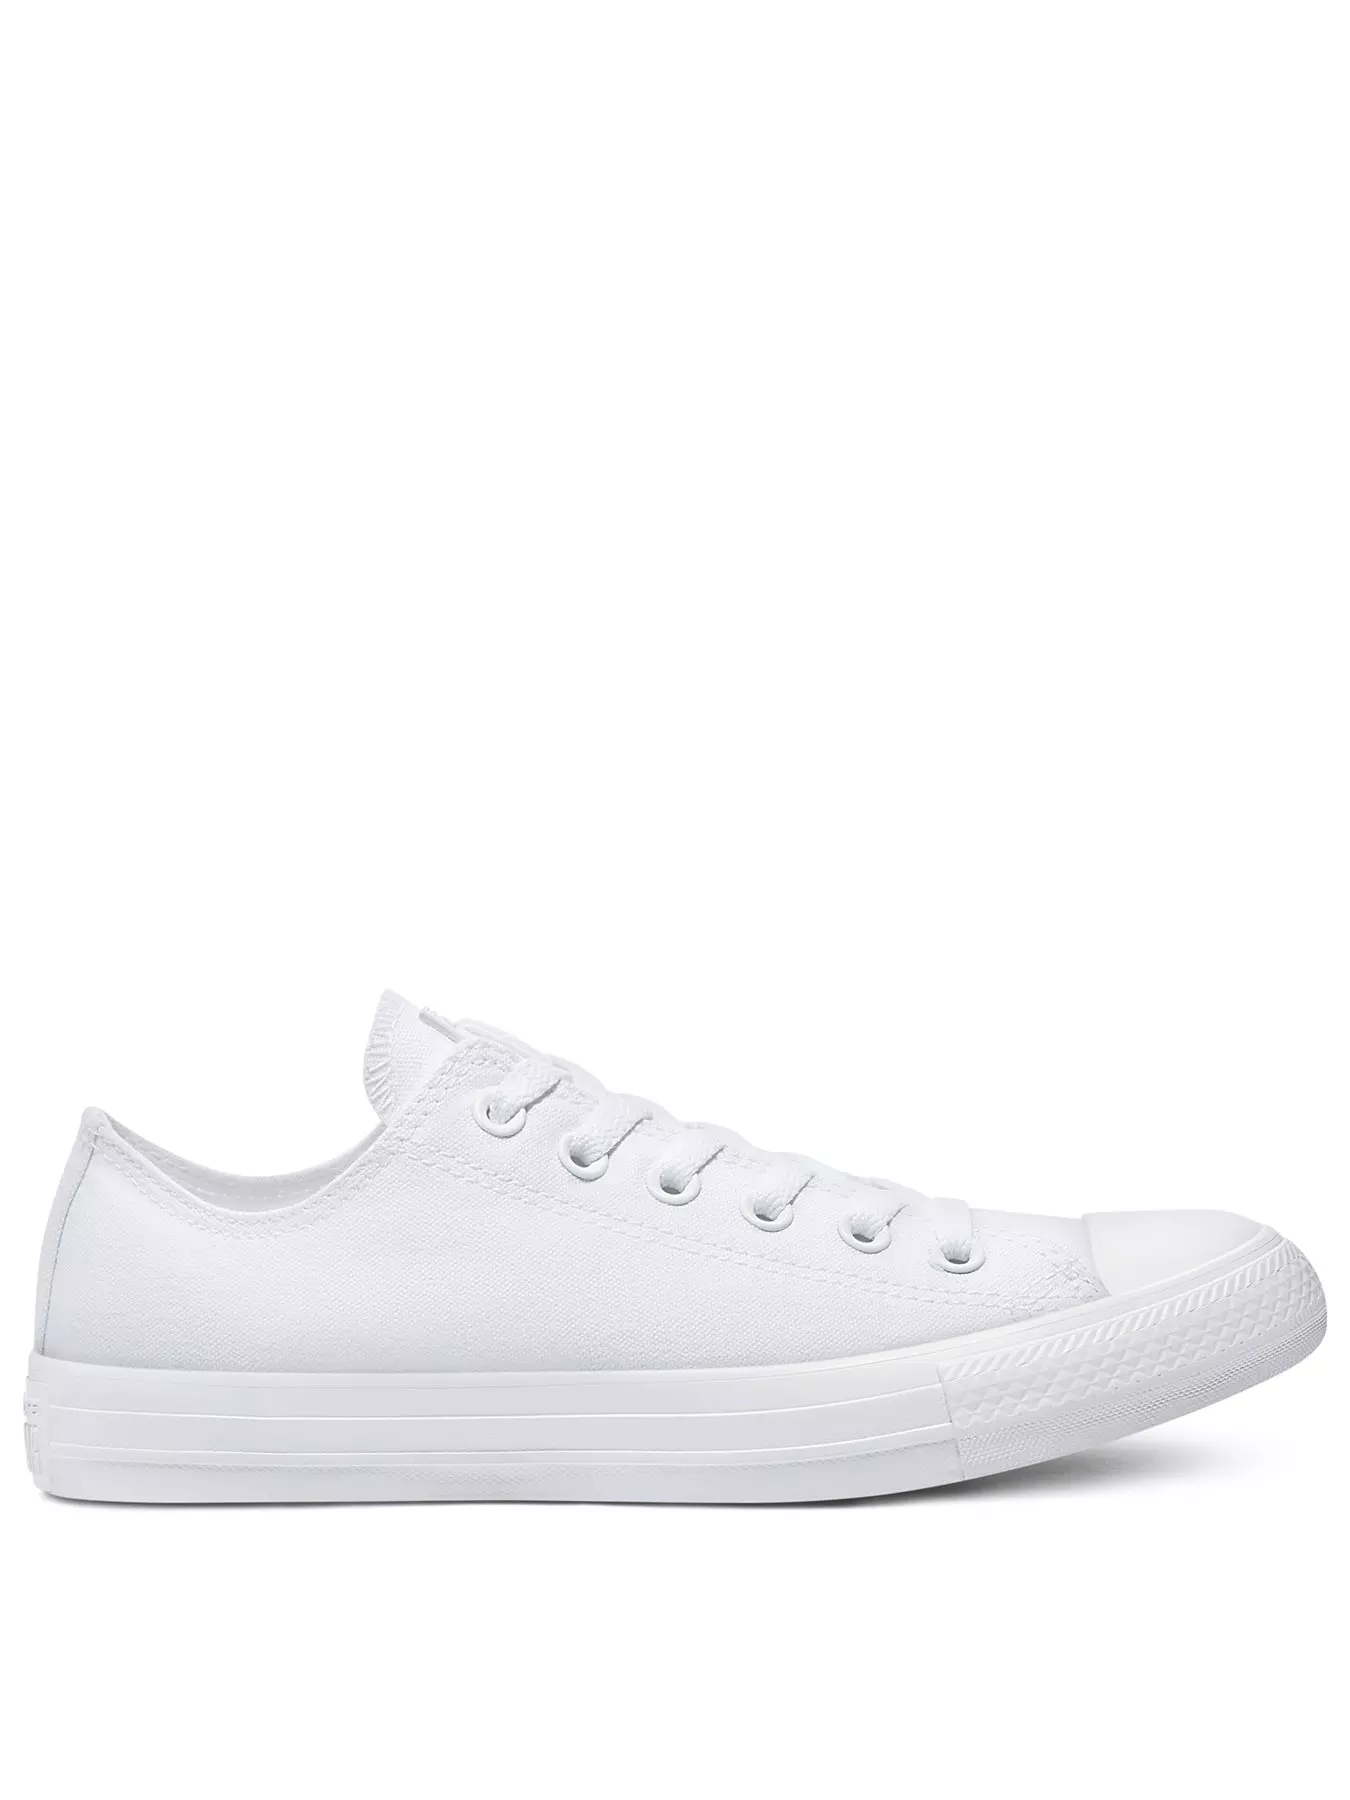 Converse Taylor All Ox | Trainers | Women | www.very.co.uk